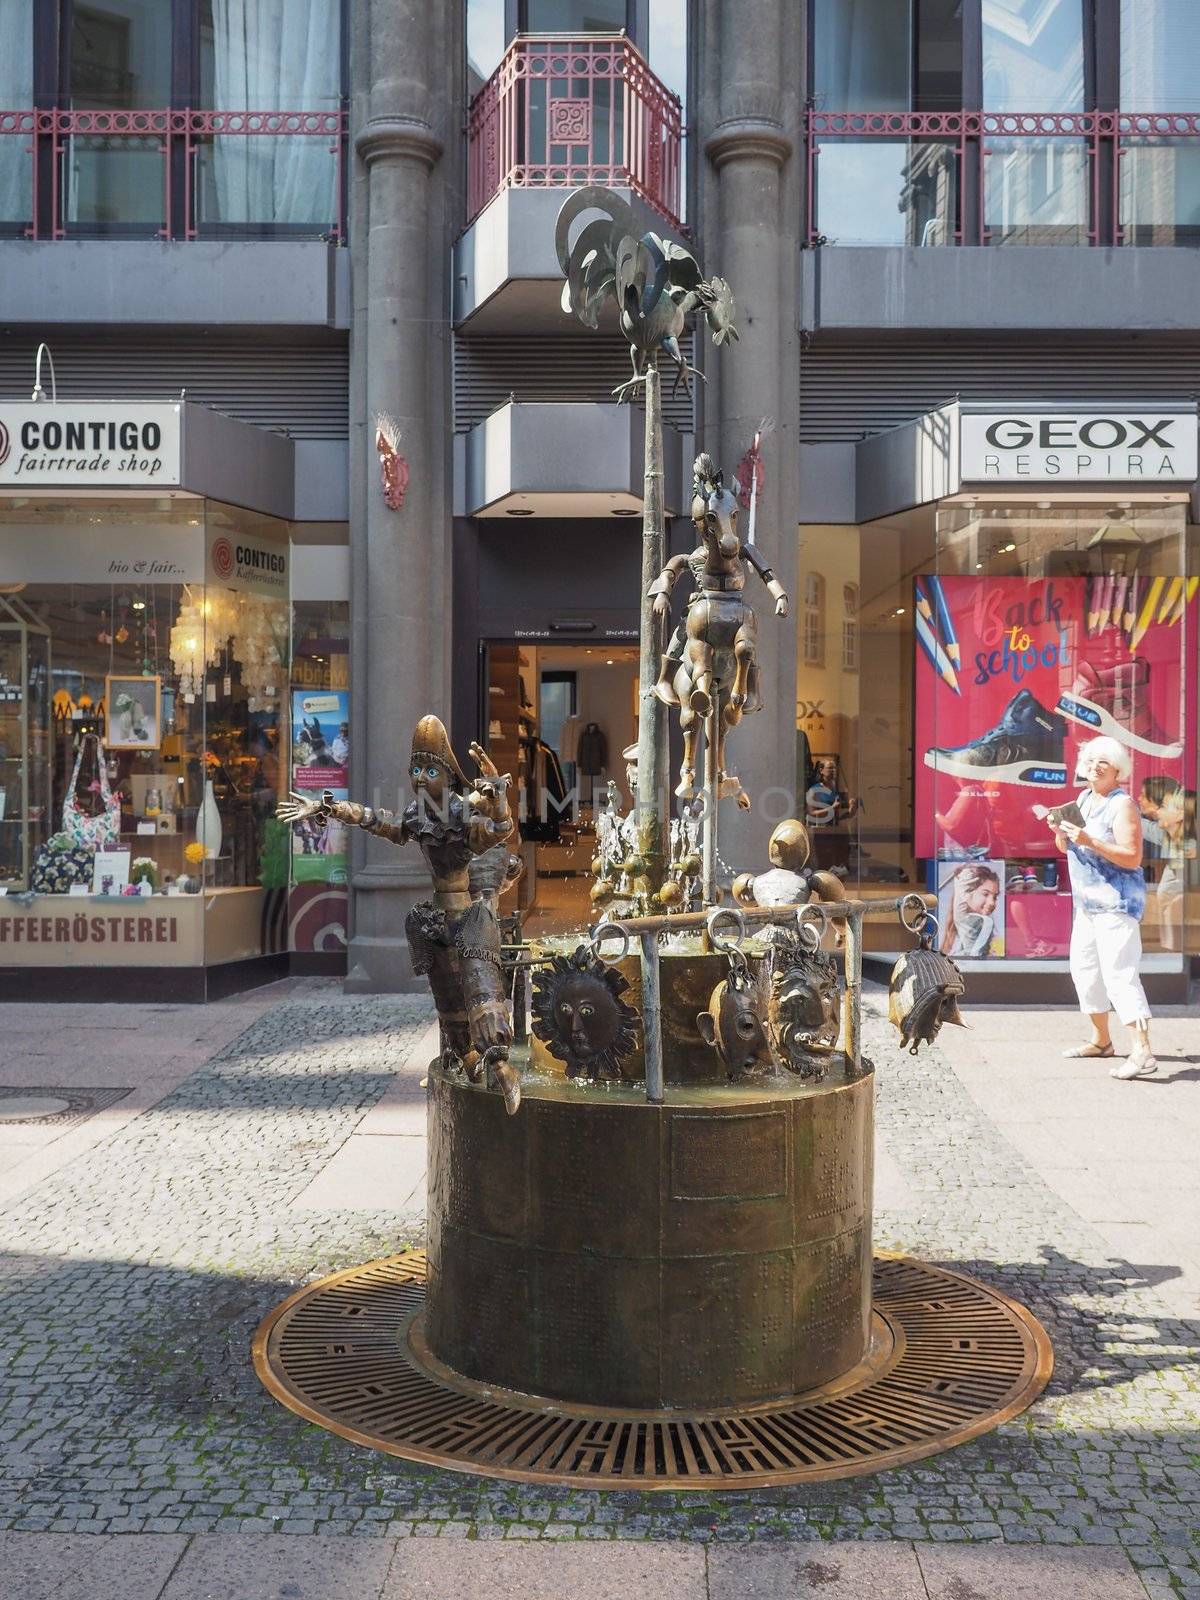 AACHEN, GERMANY - CIRCA AUGUST 2019: People in the city centre